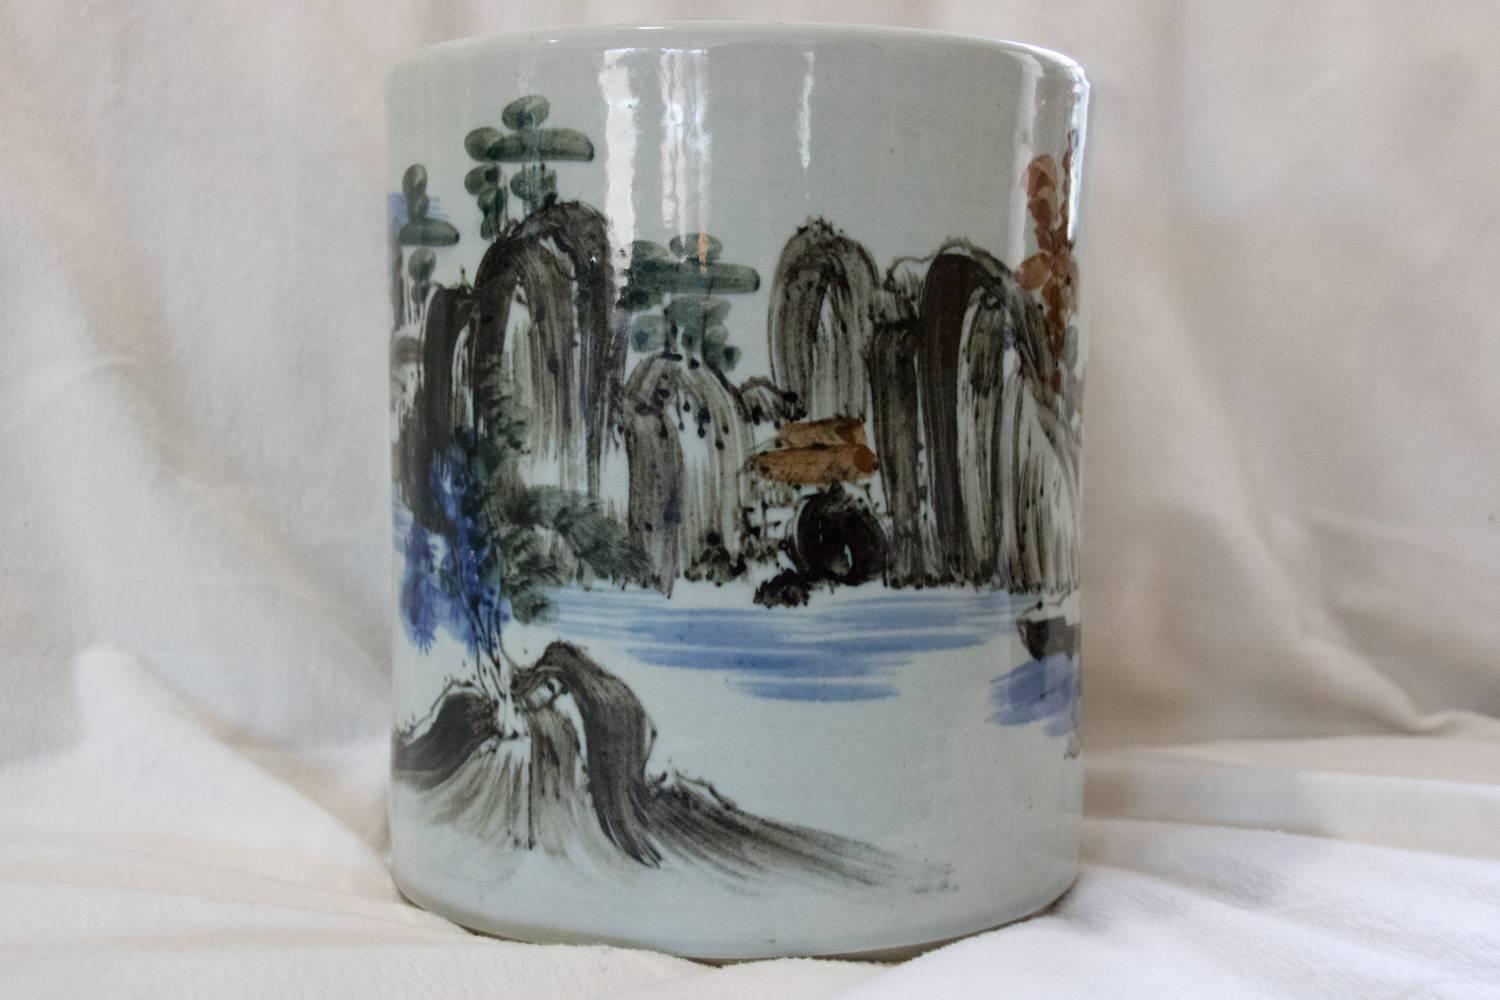 Stunning colors hand-painted Japanese stamped pottery beautiful art vase. Depicting a stunningly gorgeous mountainous water scene with burnt orange trees and rooftops and black sage mountains and stones, blue water and blue bushes, Japanese figures